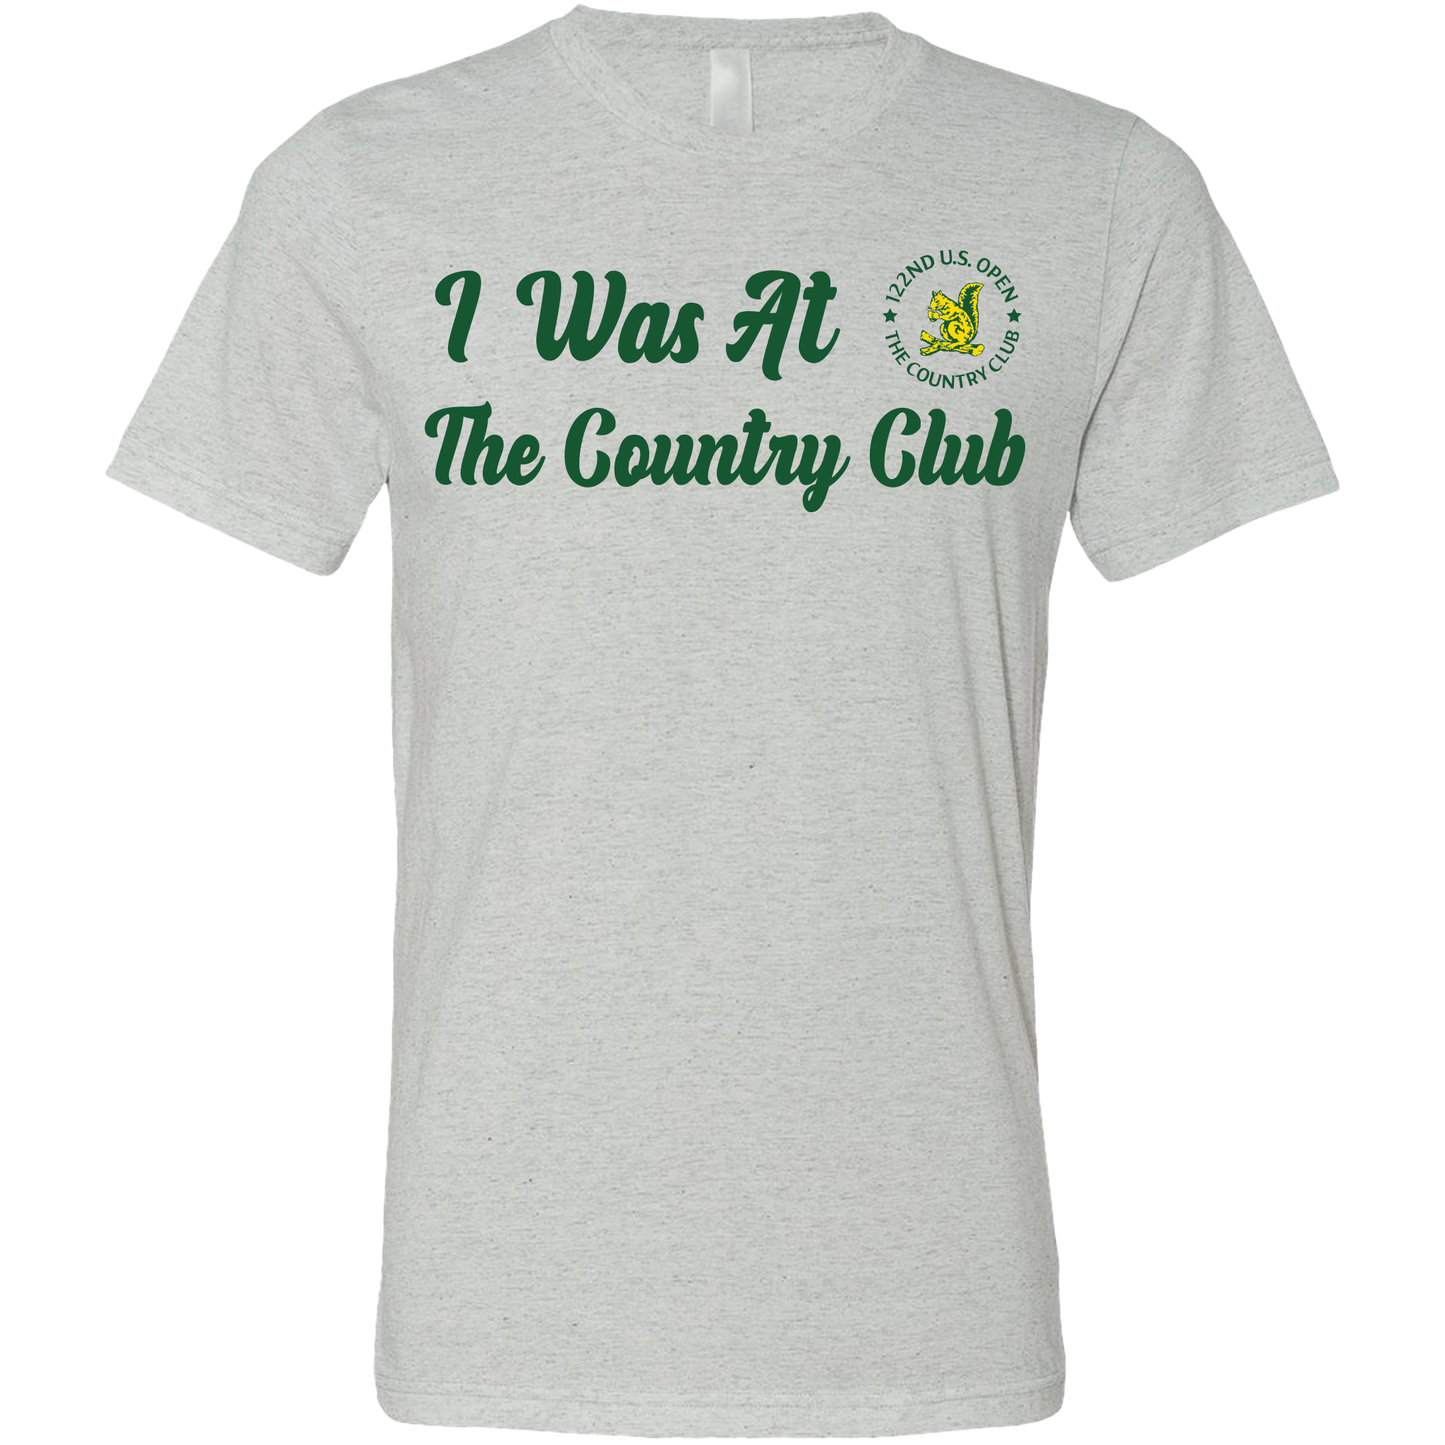 Golf U.S. Open I Was At The Country Club Unisex T-Shirt SwingJuice